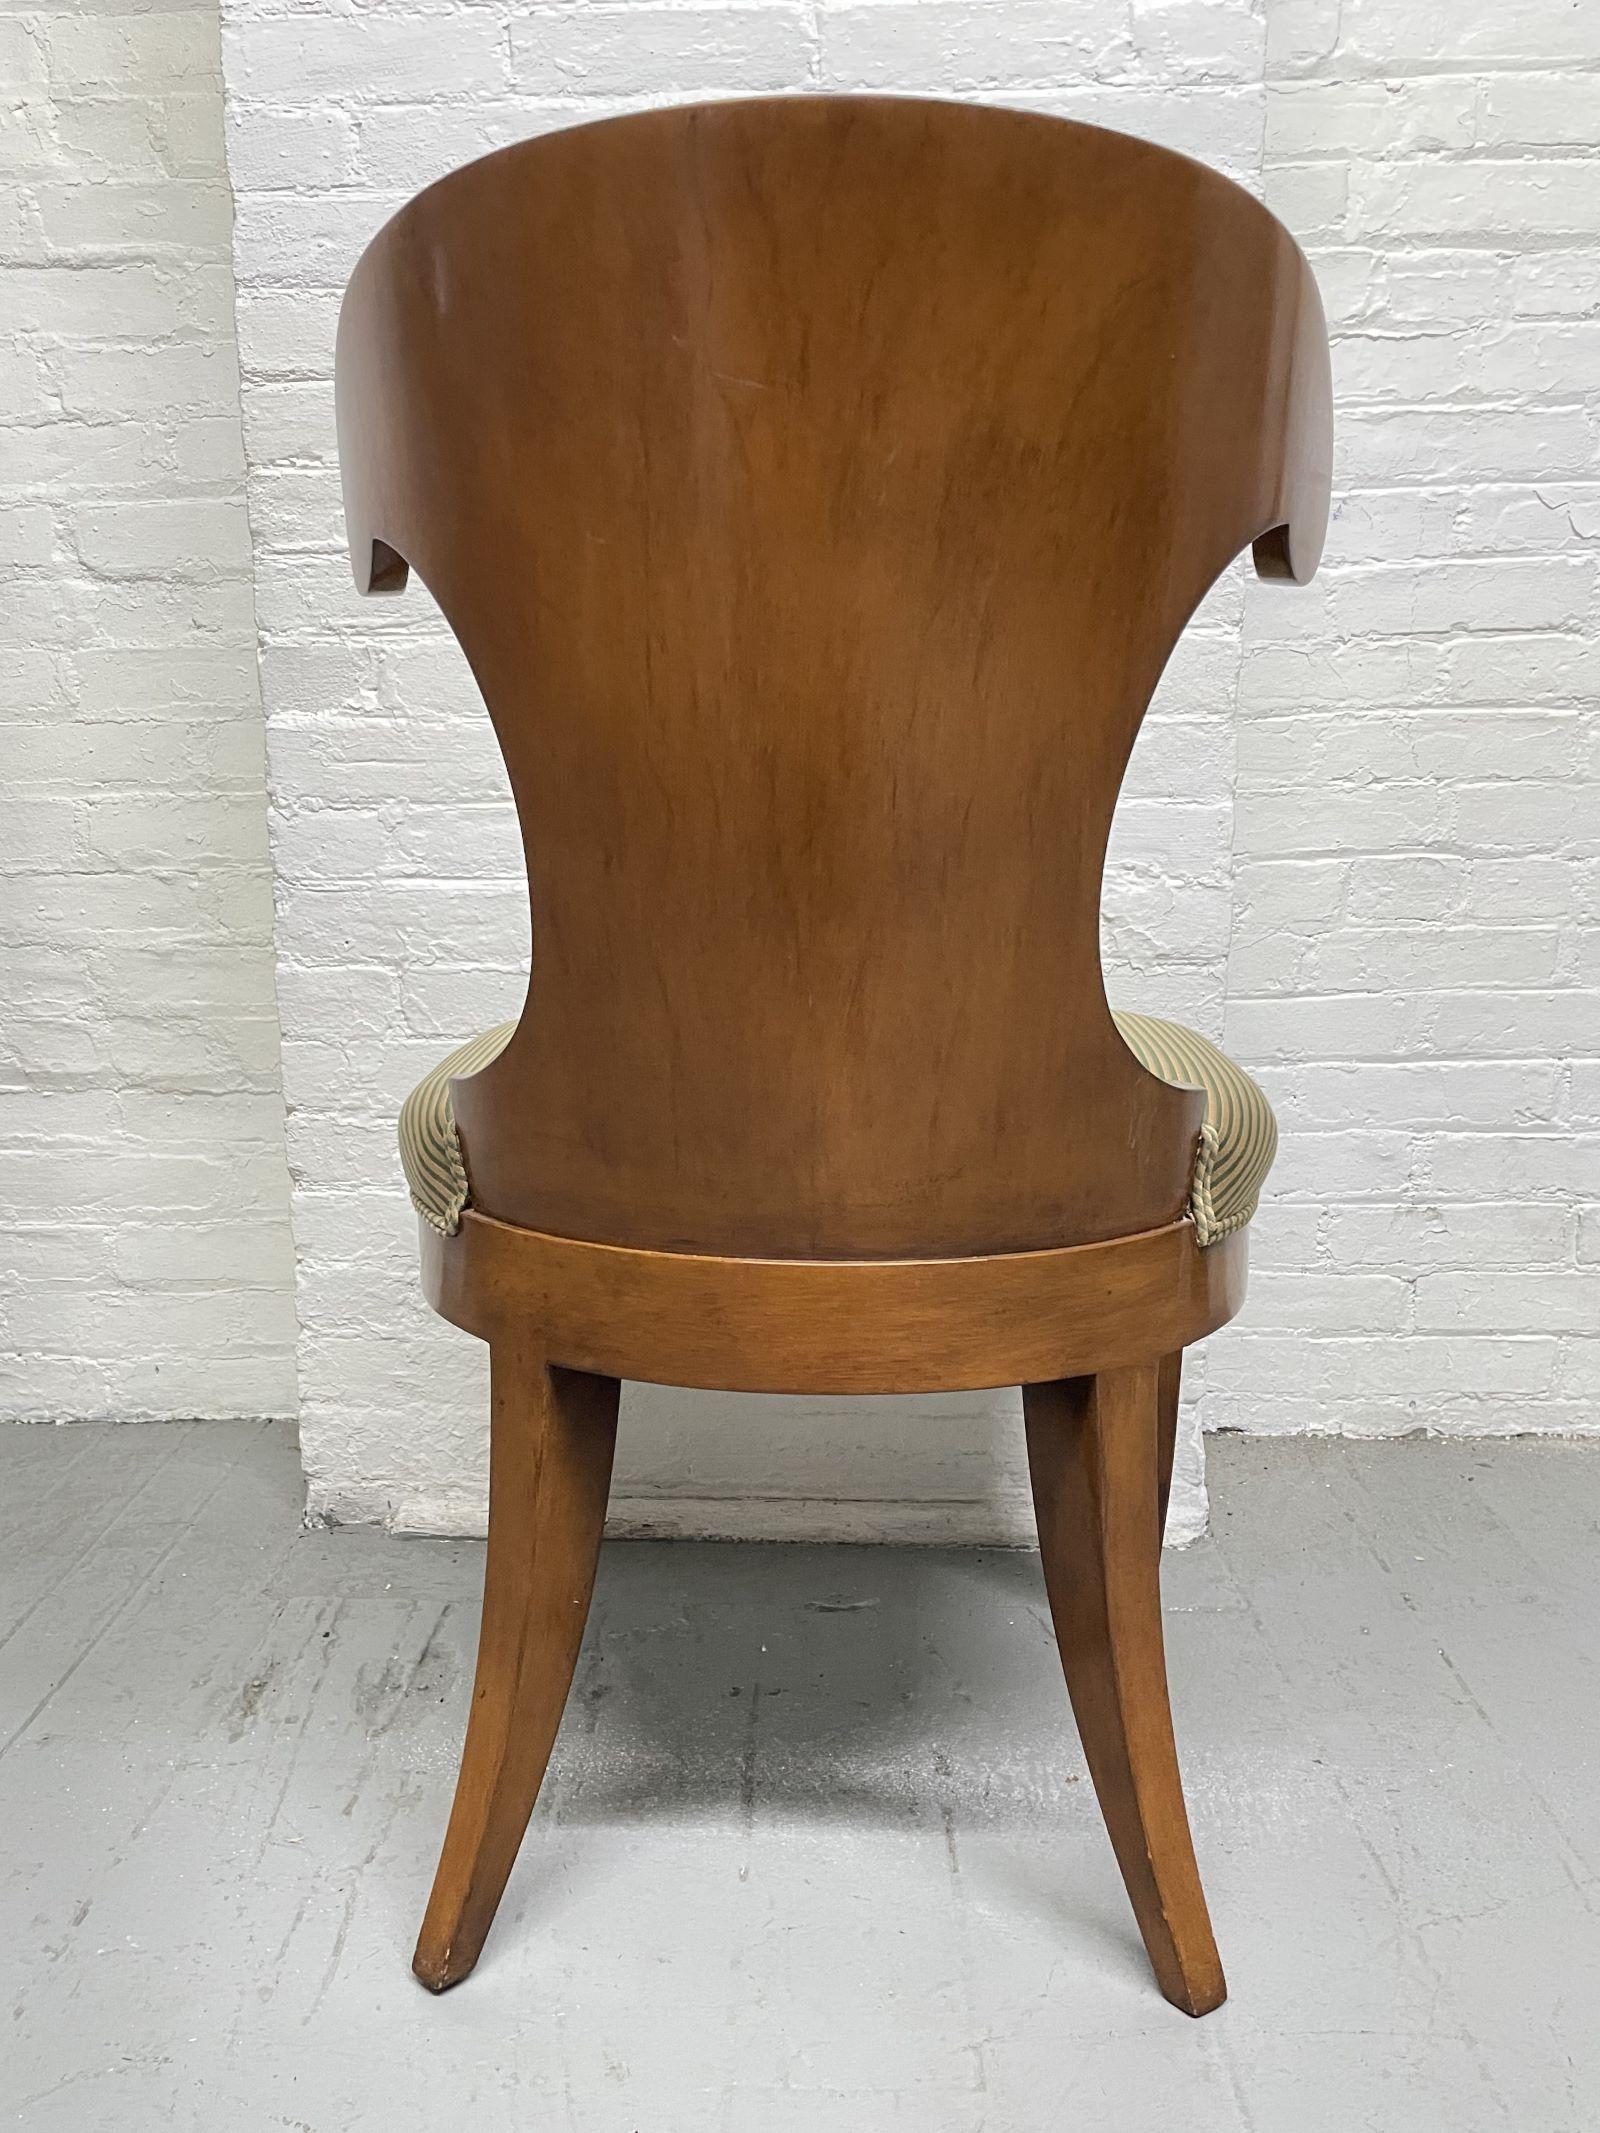 Mid-20th Century Klismos Style Walnut Dining Chairs Set of 4 For Sale